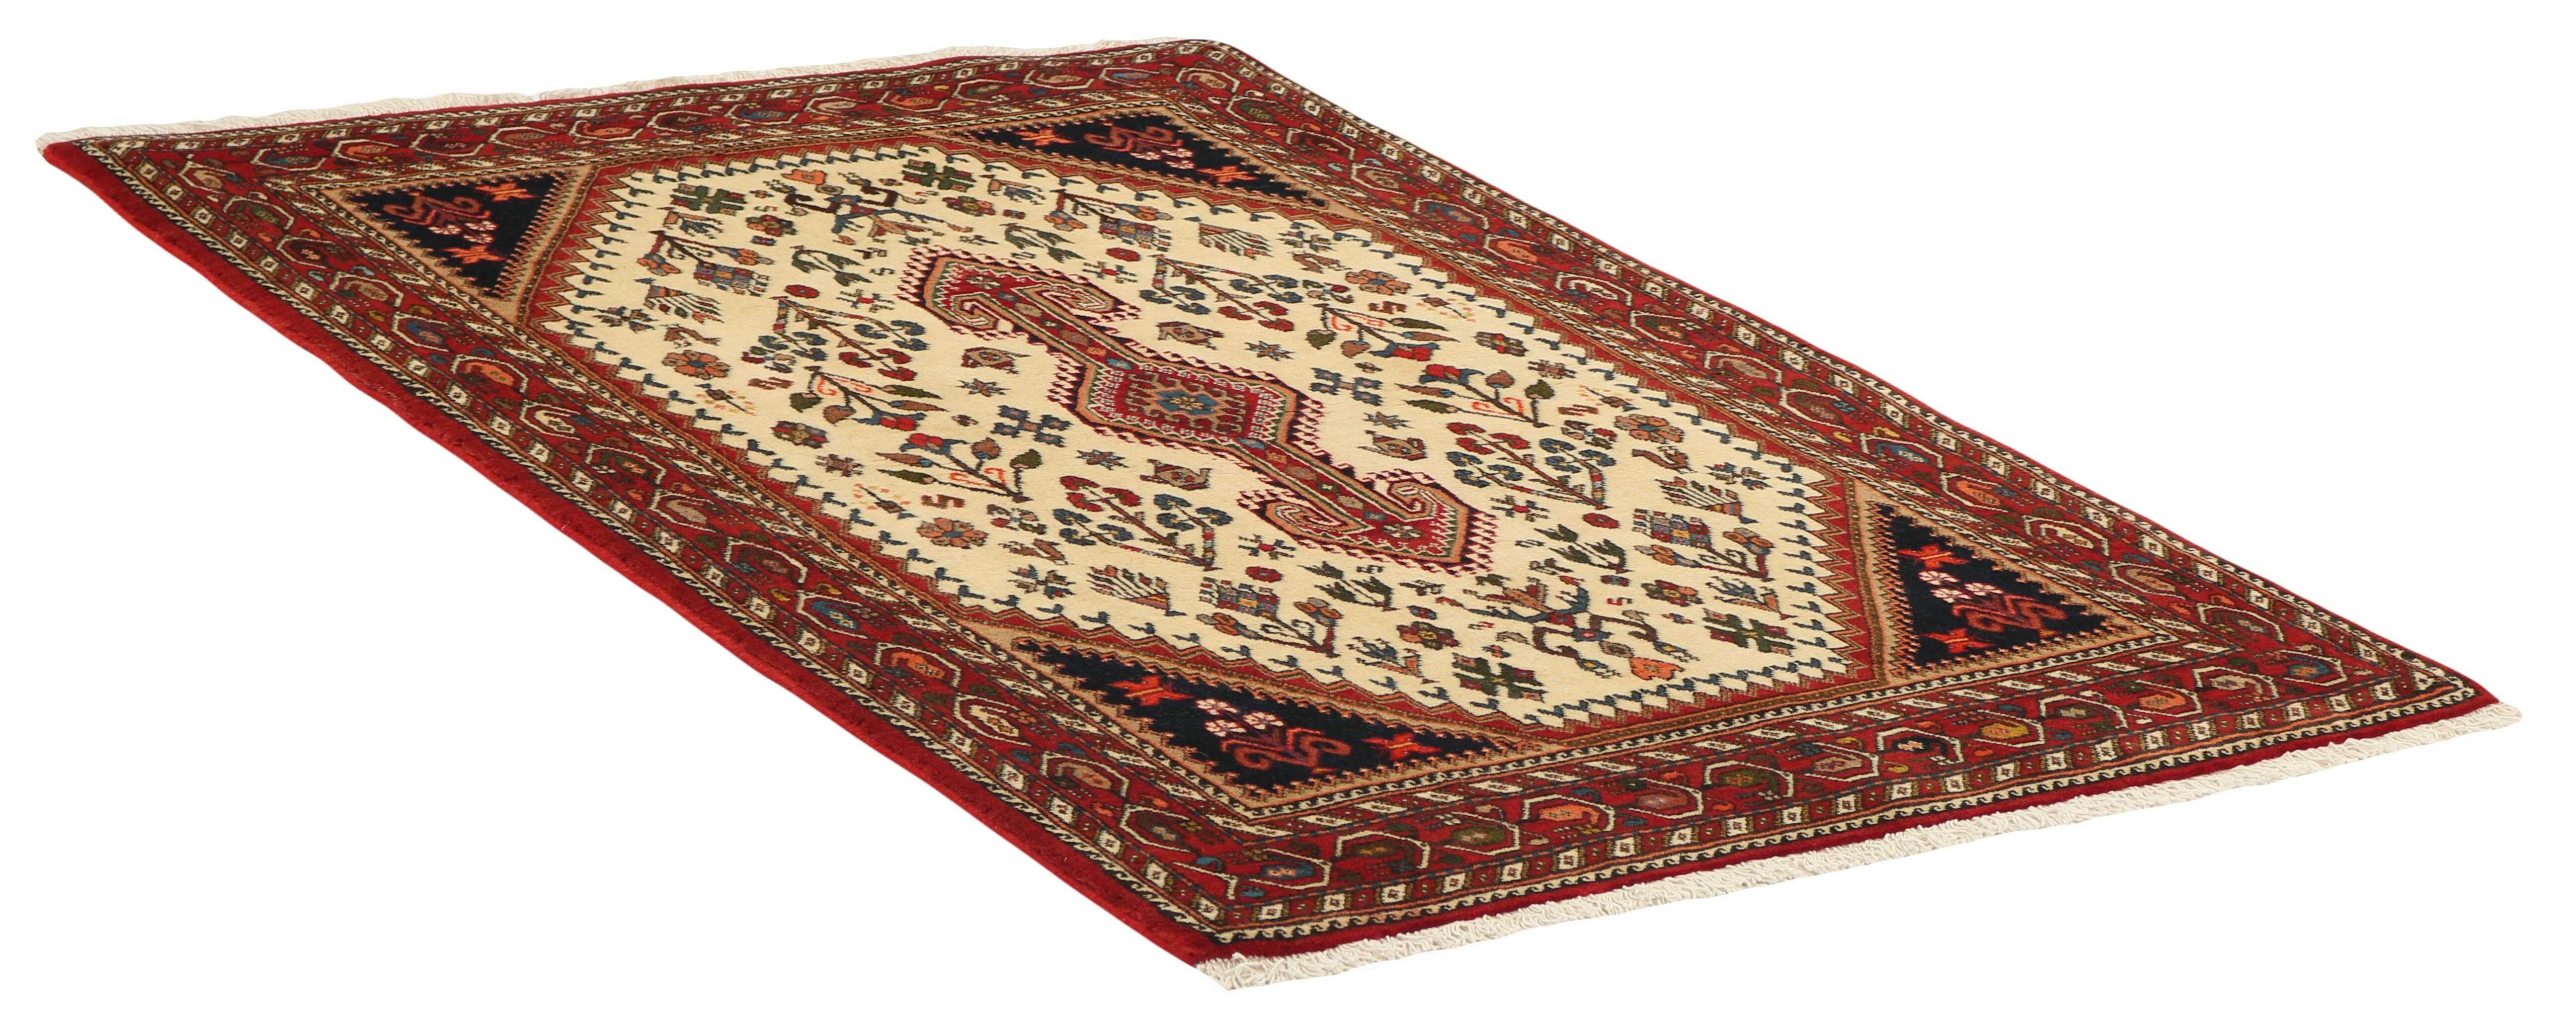 Authentic persian rug with traditional tribal geometric design in red 